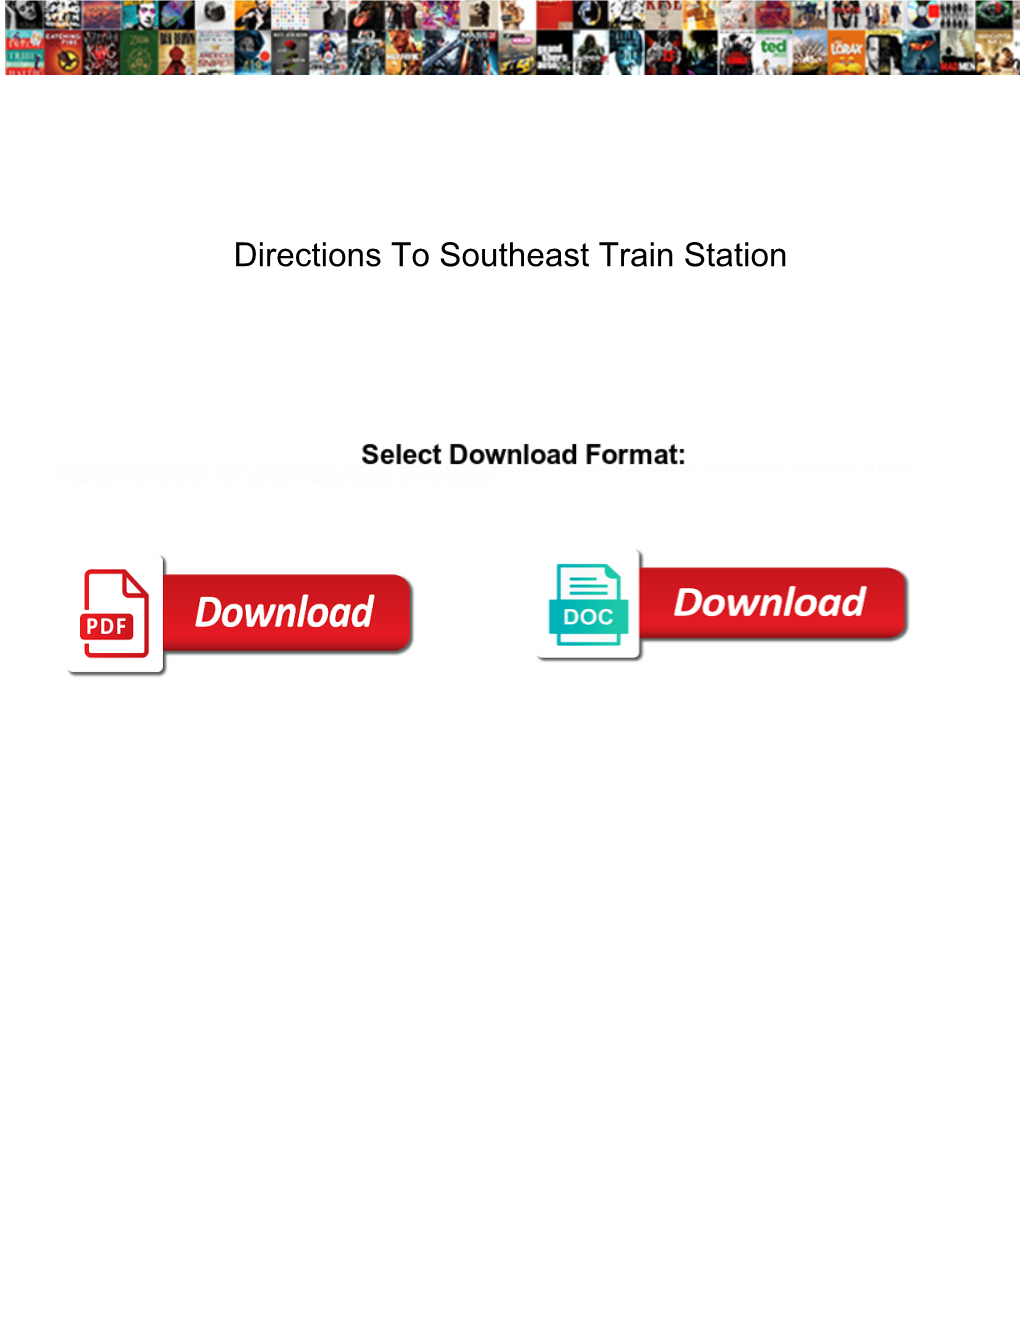 Directions to Southeast Train Station